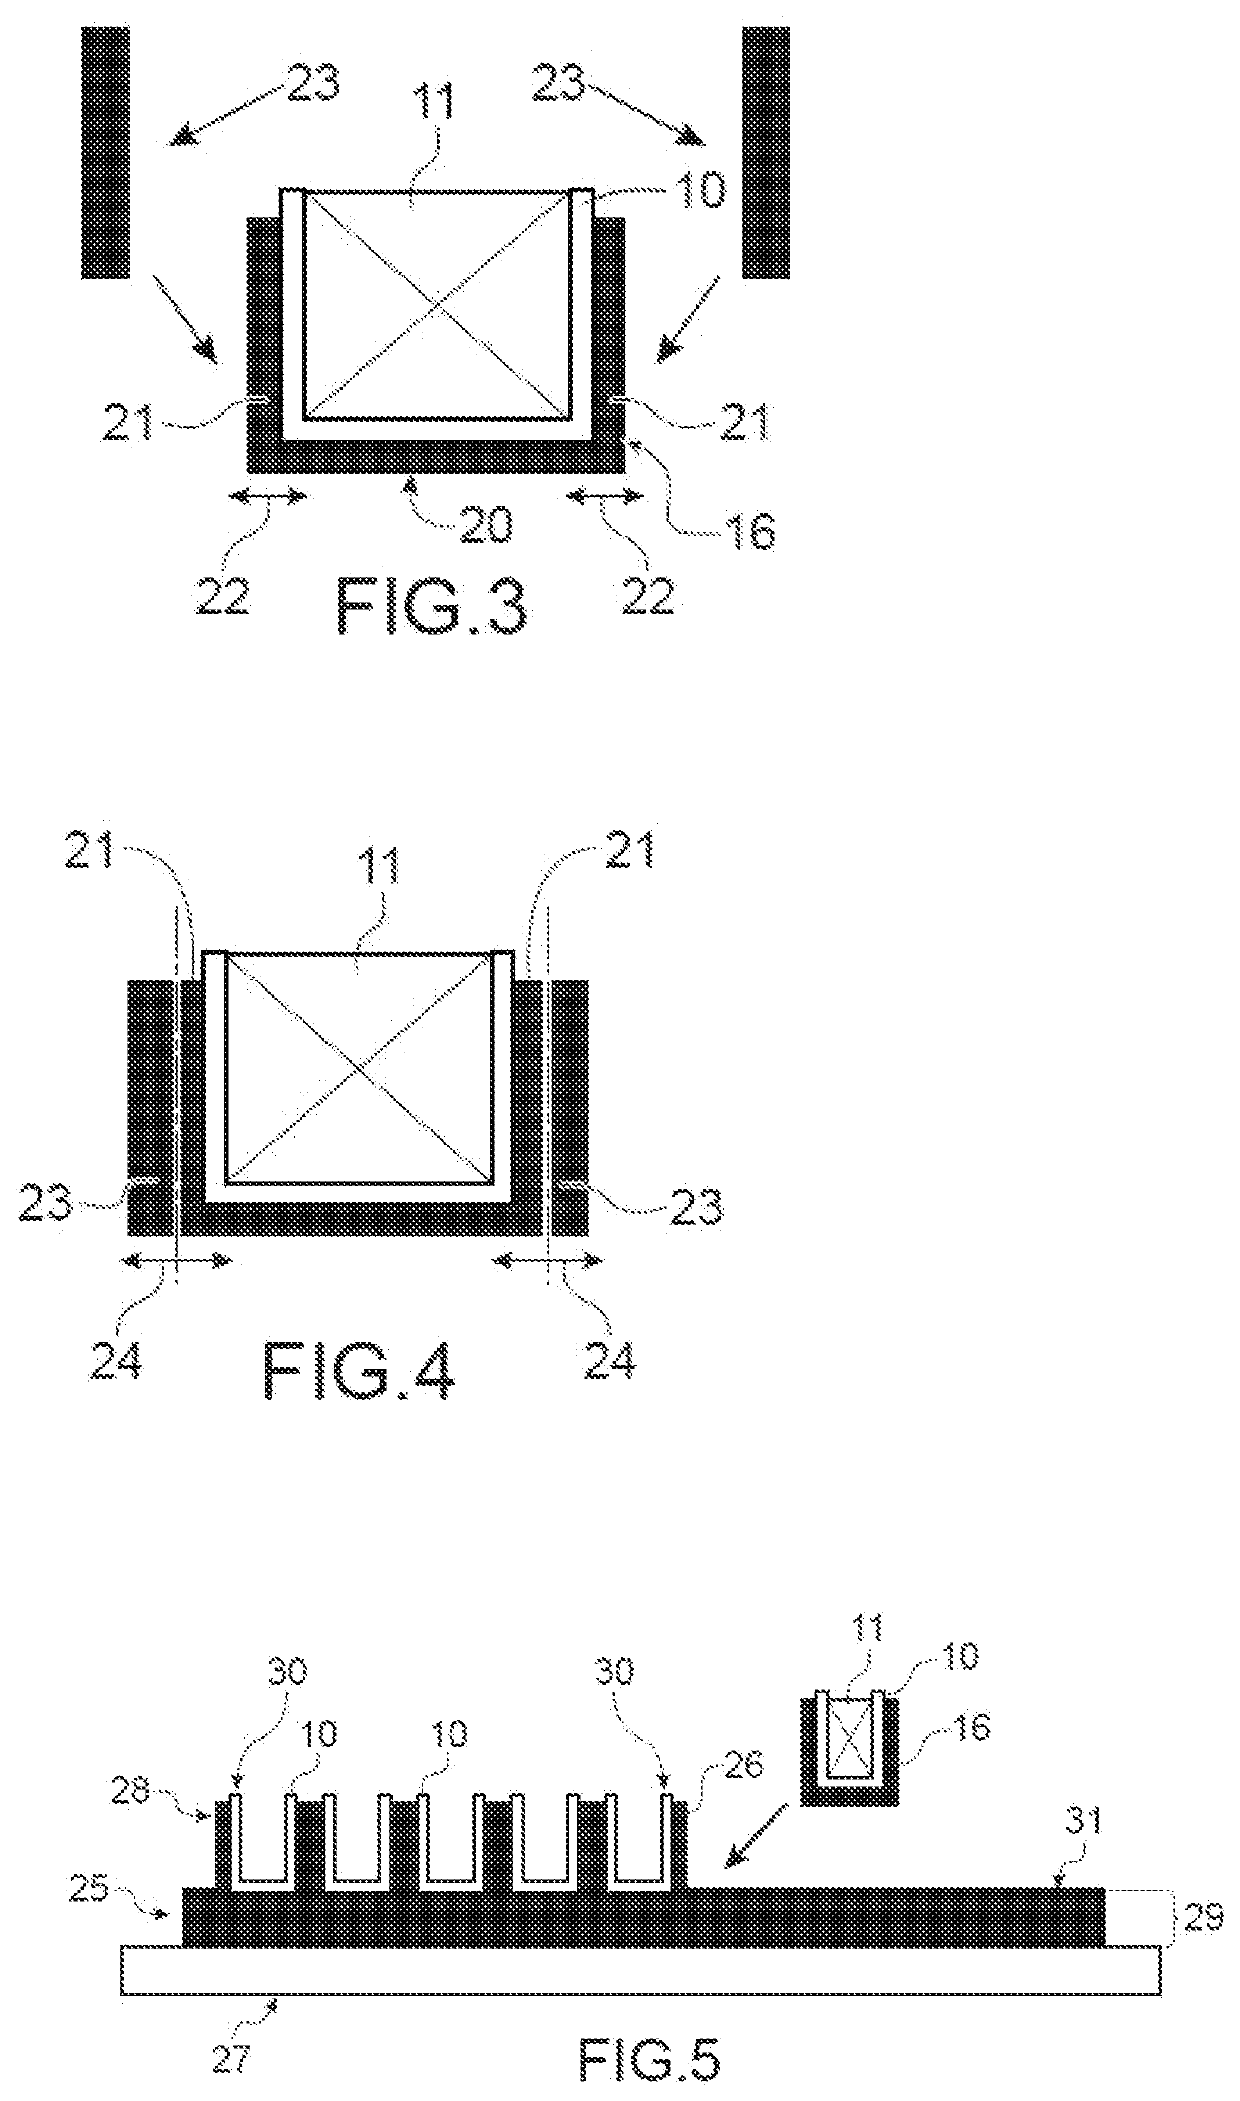 Method for manufacturing a bagged preform of a component made of composite material and method for manufacturing said component